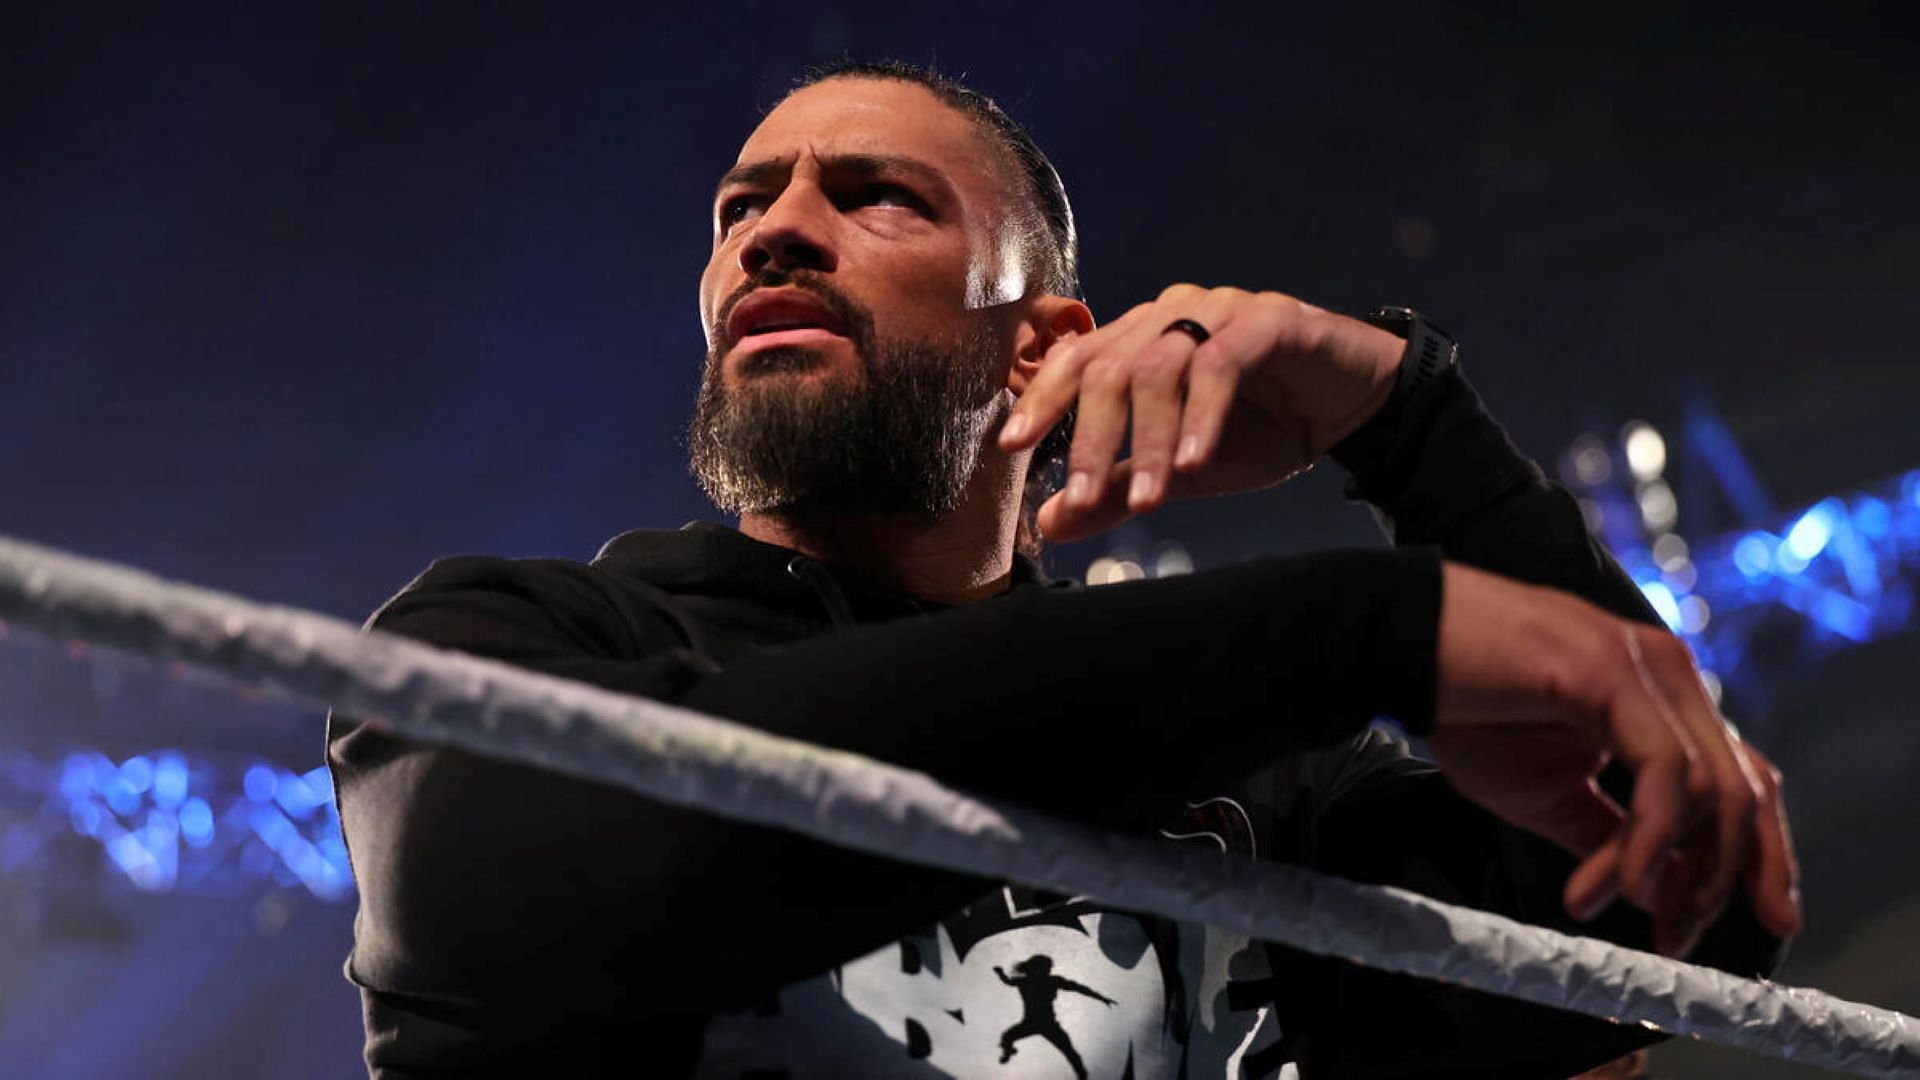 Who will draw the ire of Roman Reigns when he returns to action?